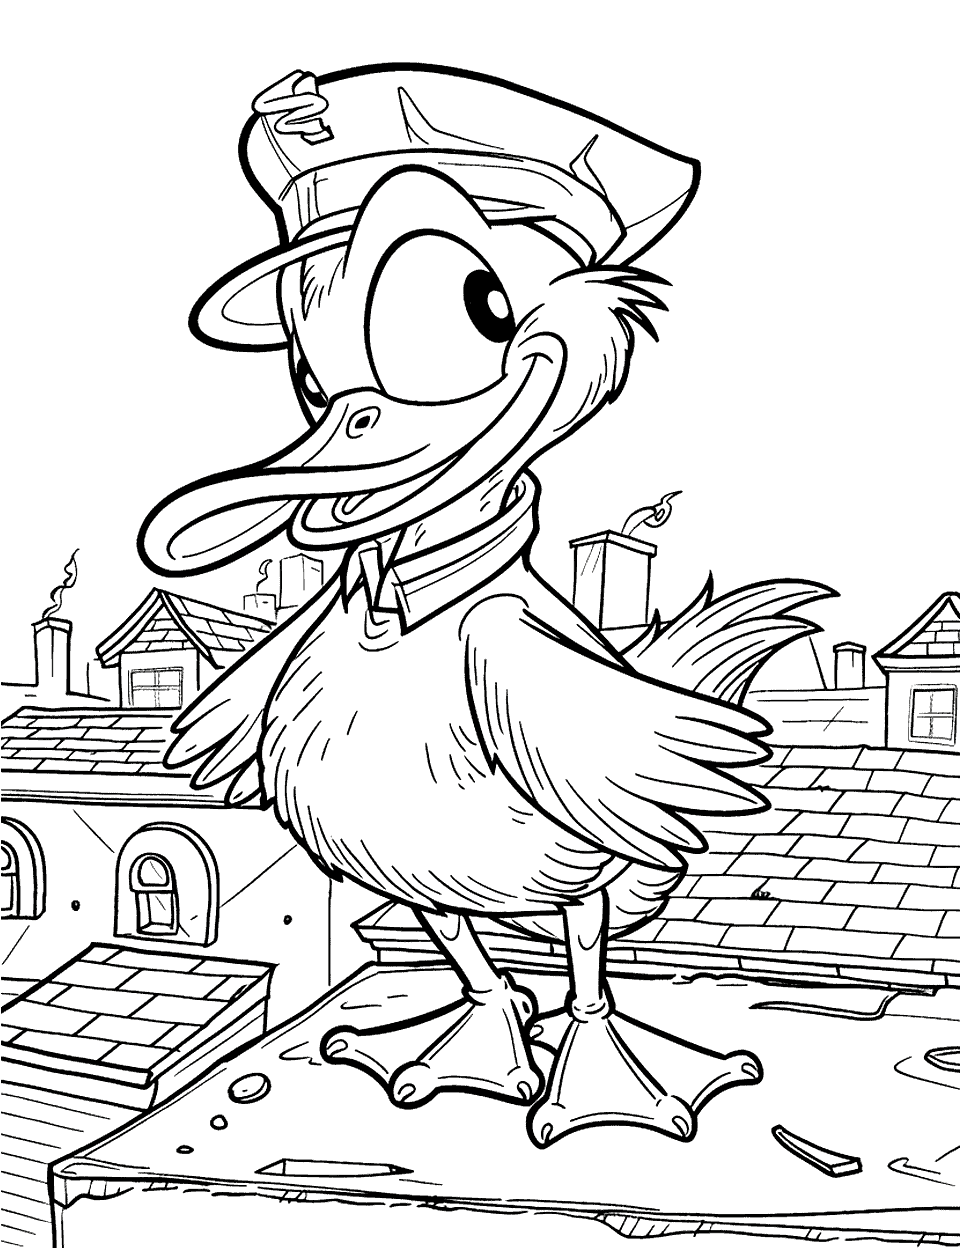 Darkwing Duck in Action Coloring Page - Darkwing Duck striking a heroic pose on top of a city rooftop.